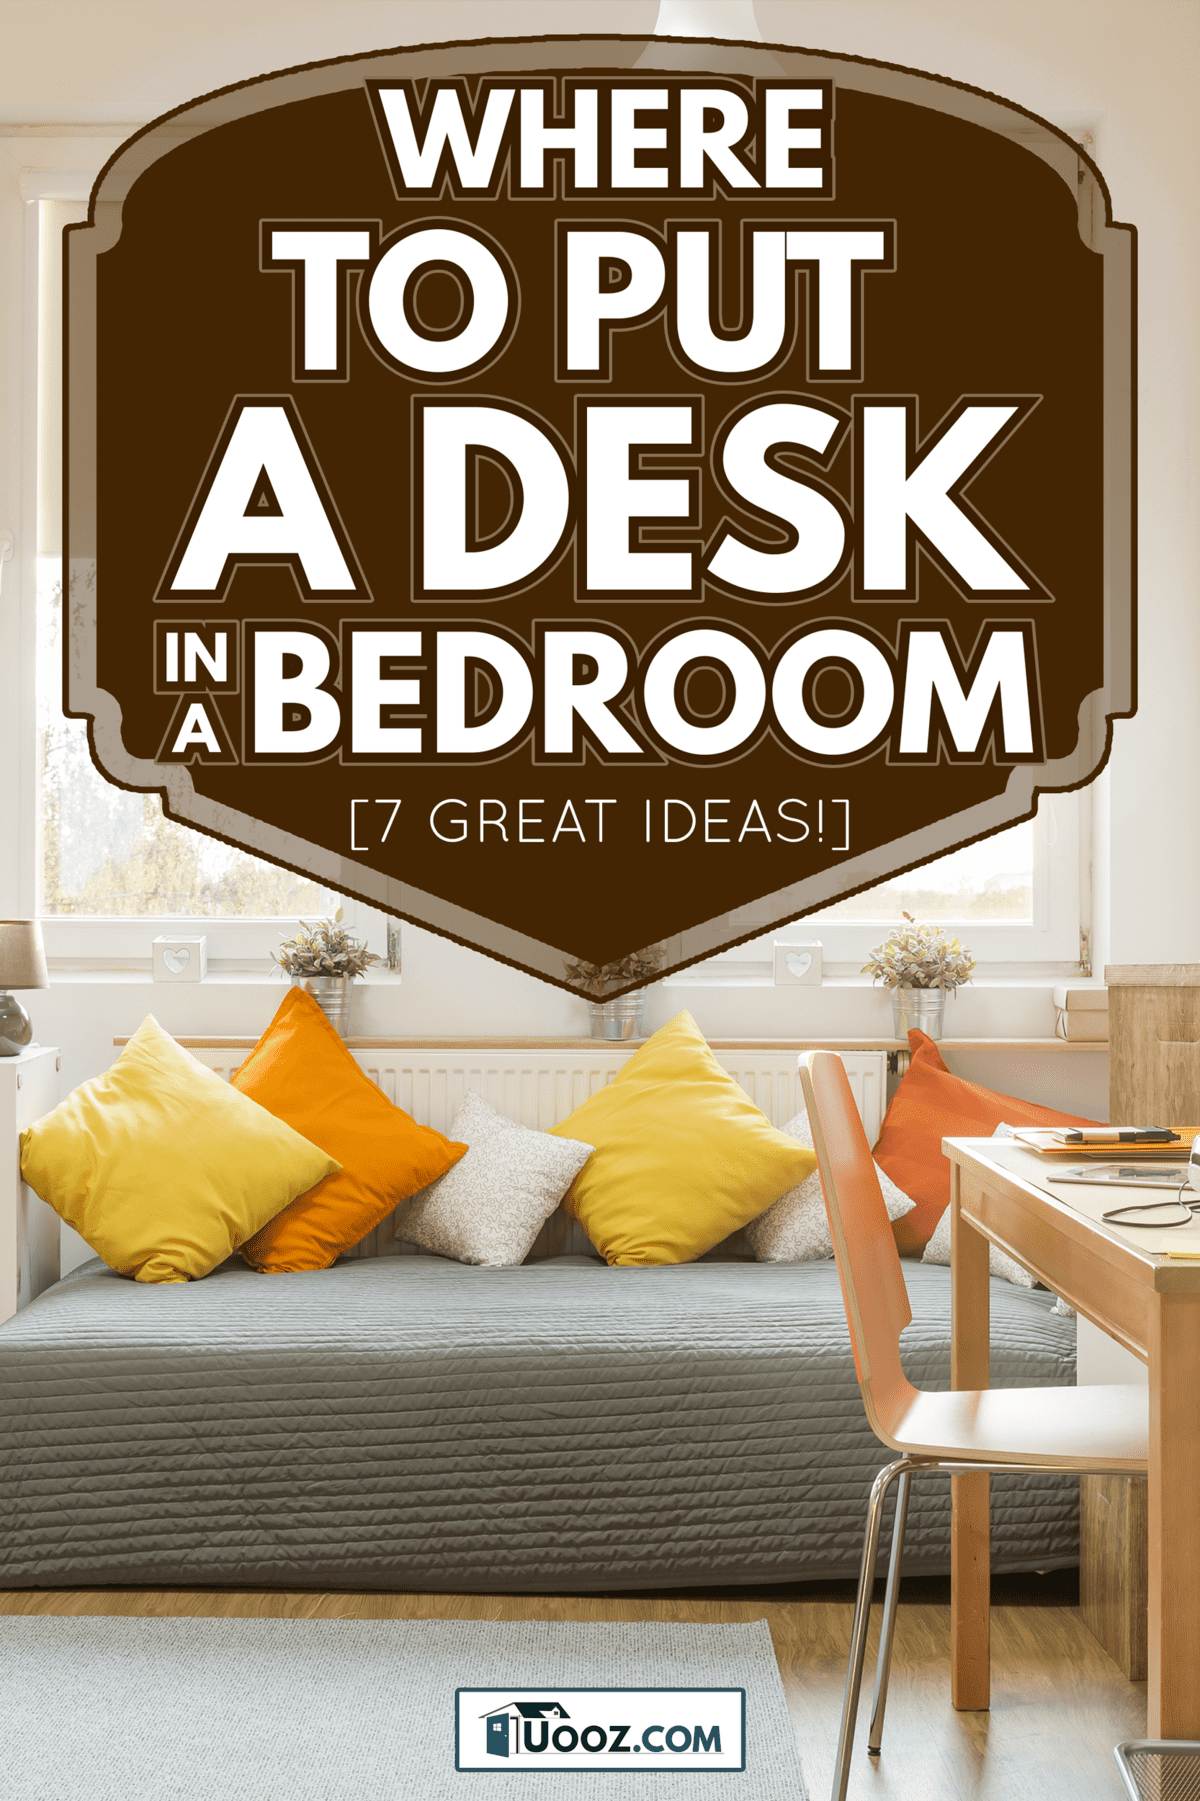 Light cozy teen room with color decorations - Where To Put A Desk In A Bedroom [7 Great Ideas!]